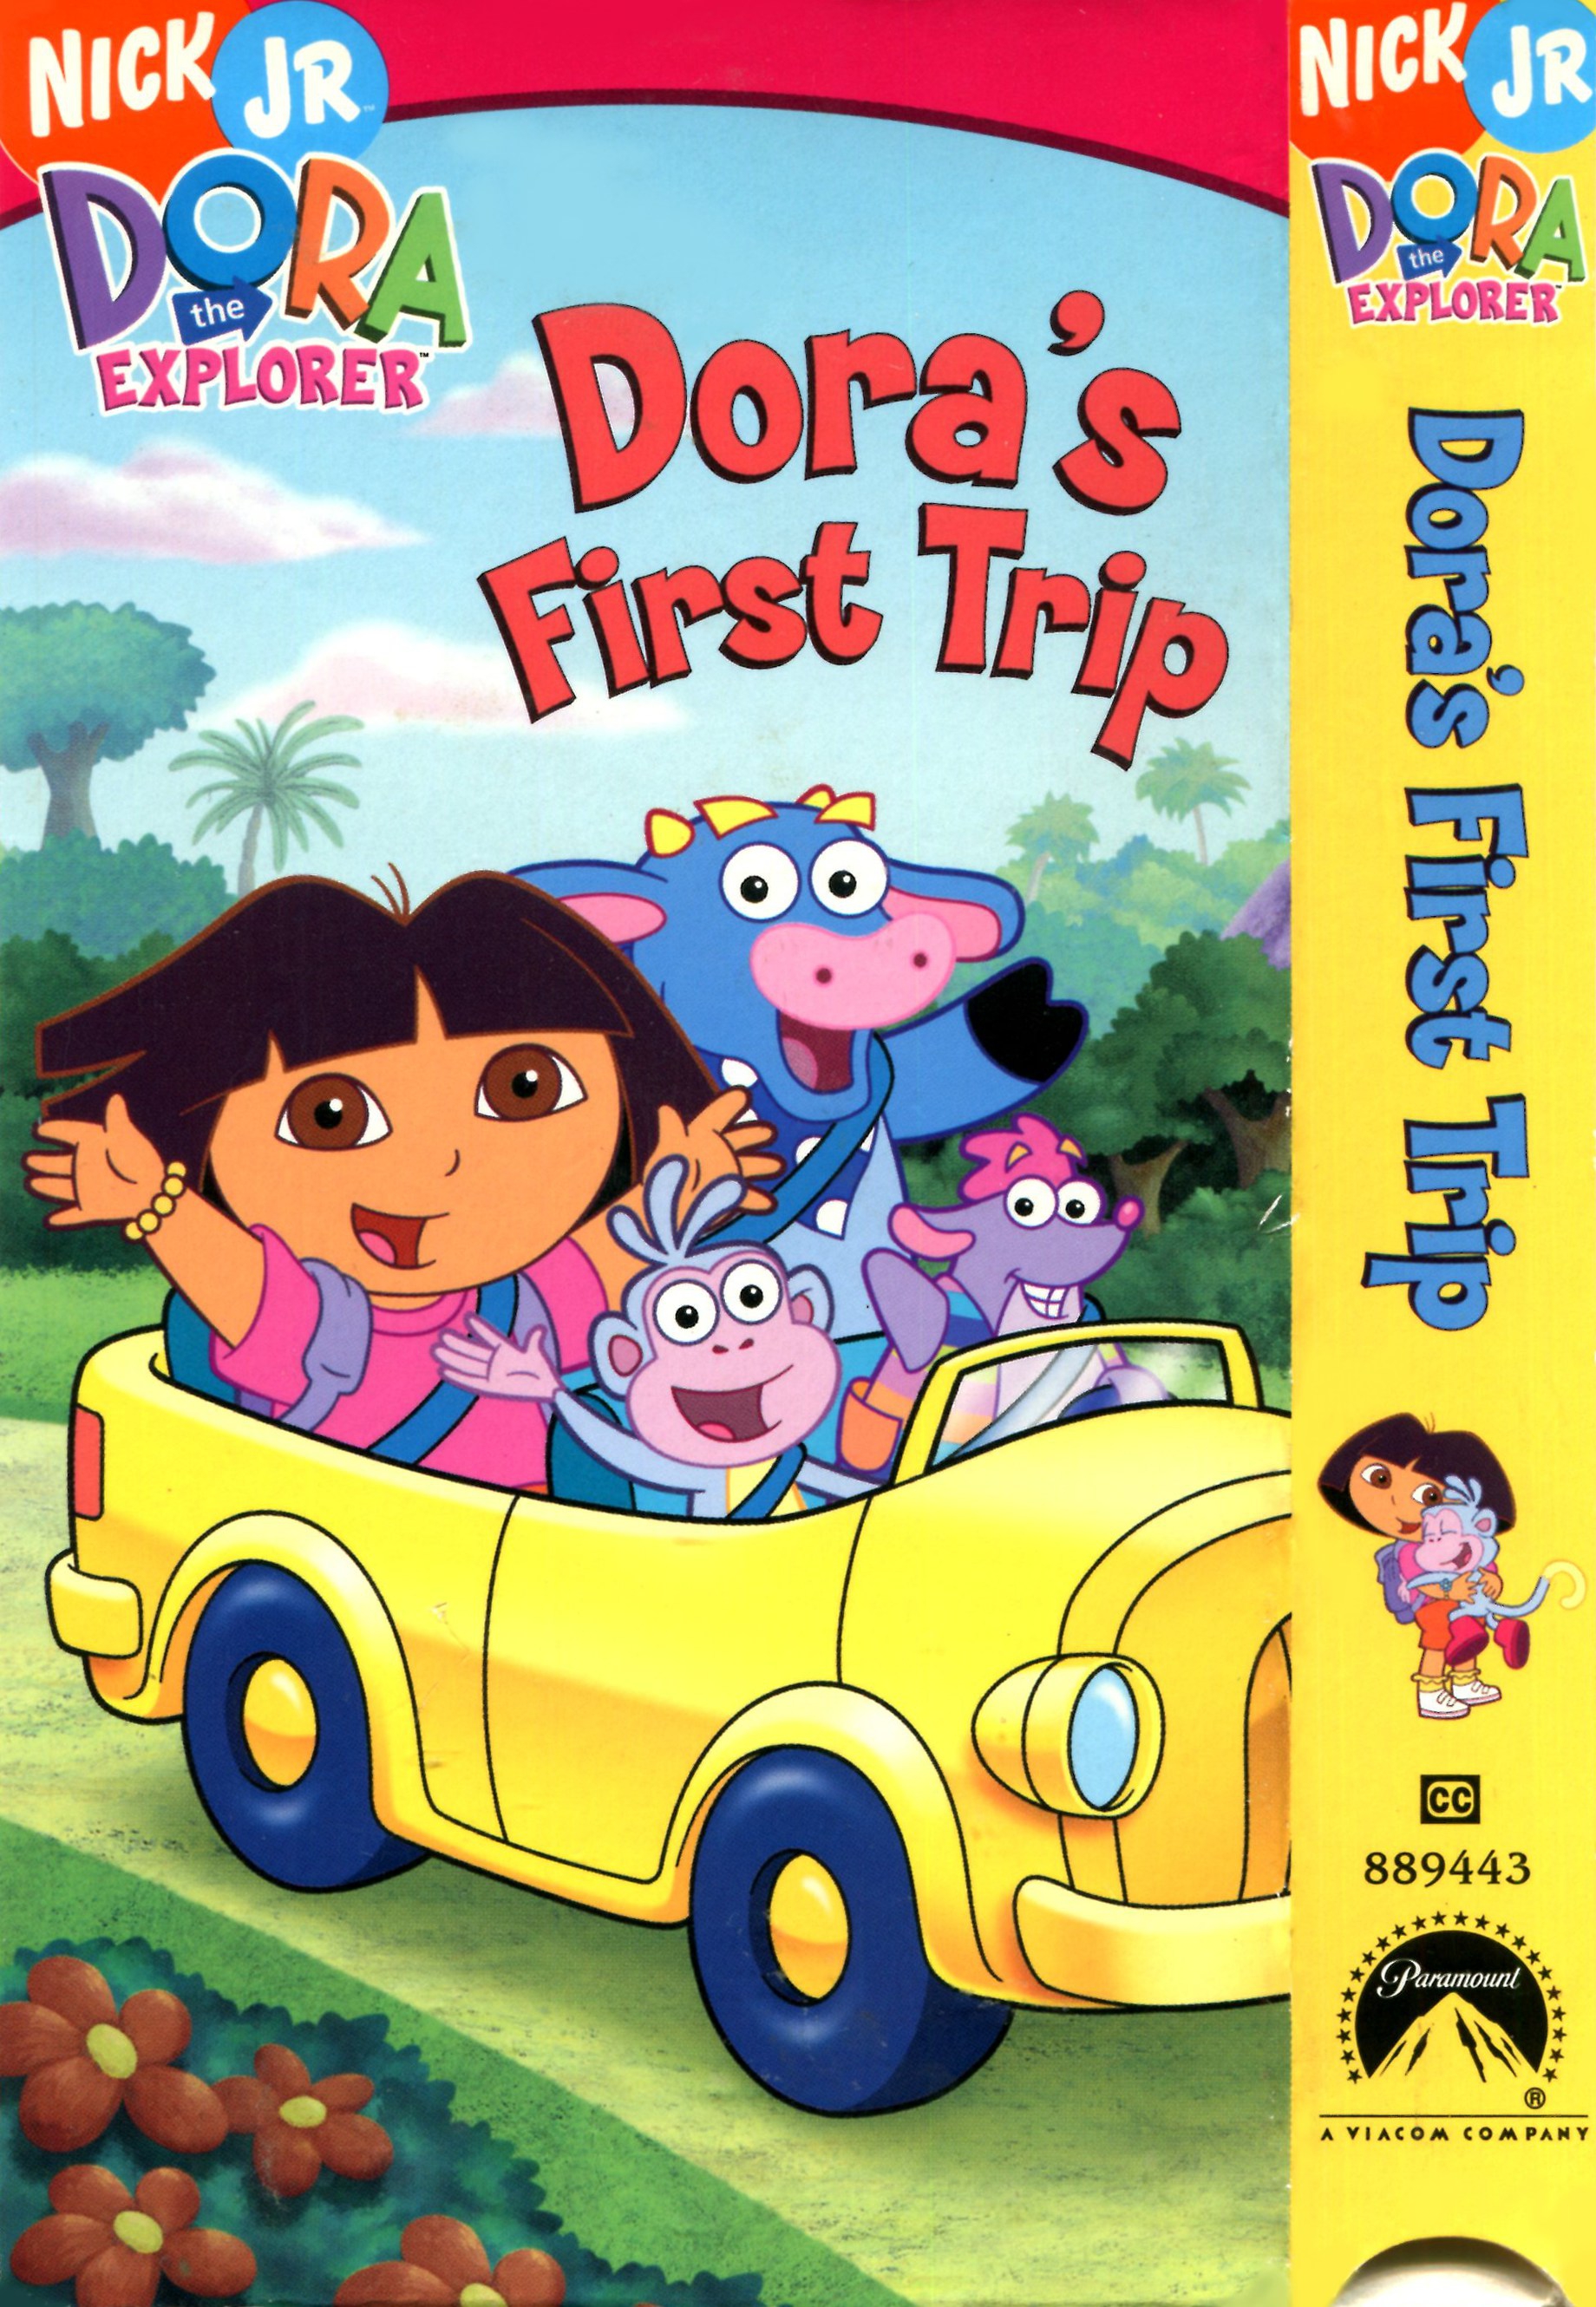 Dora's First Trip! is a Dora the Explorer VHS tape featuring episo...